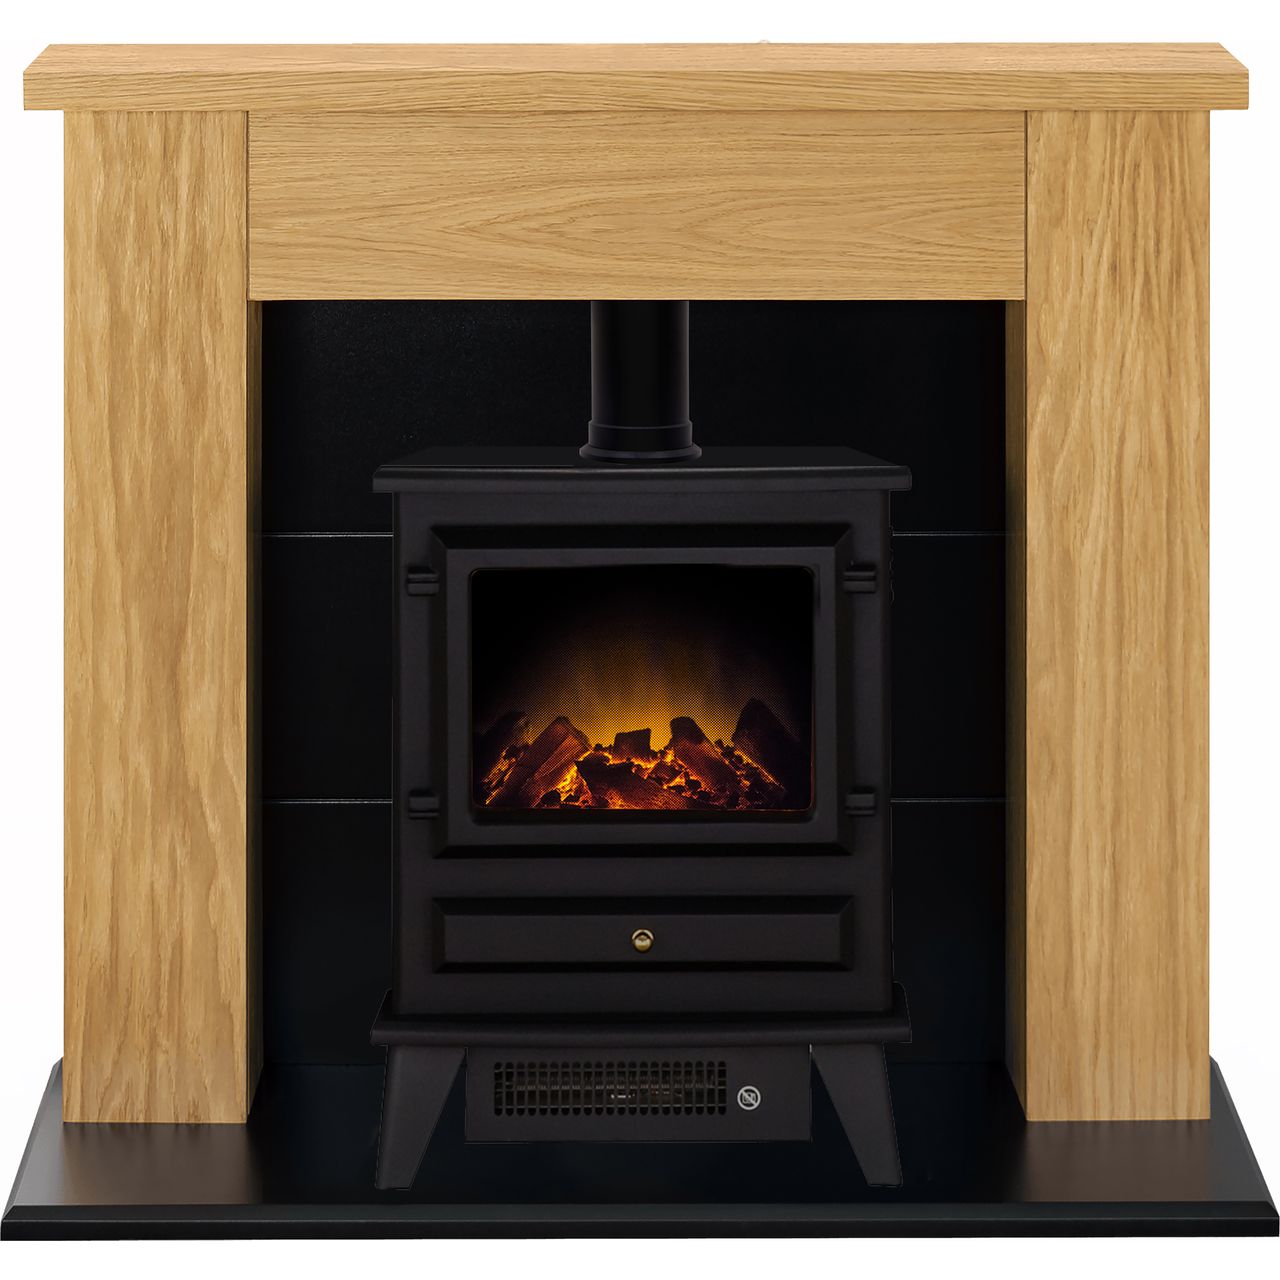 Adam Fires Stocksmoor Suite with Hudson Electric Fire 21877 Log Effect Suite And Surround Fireplace Review